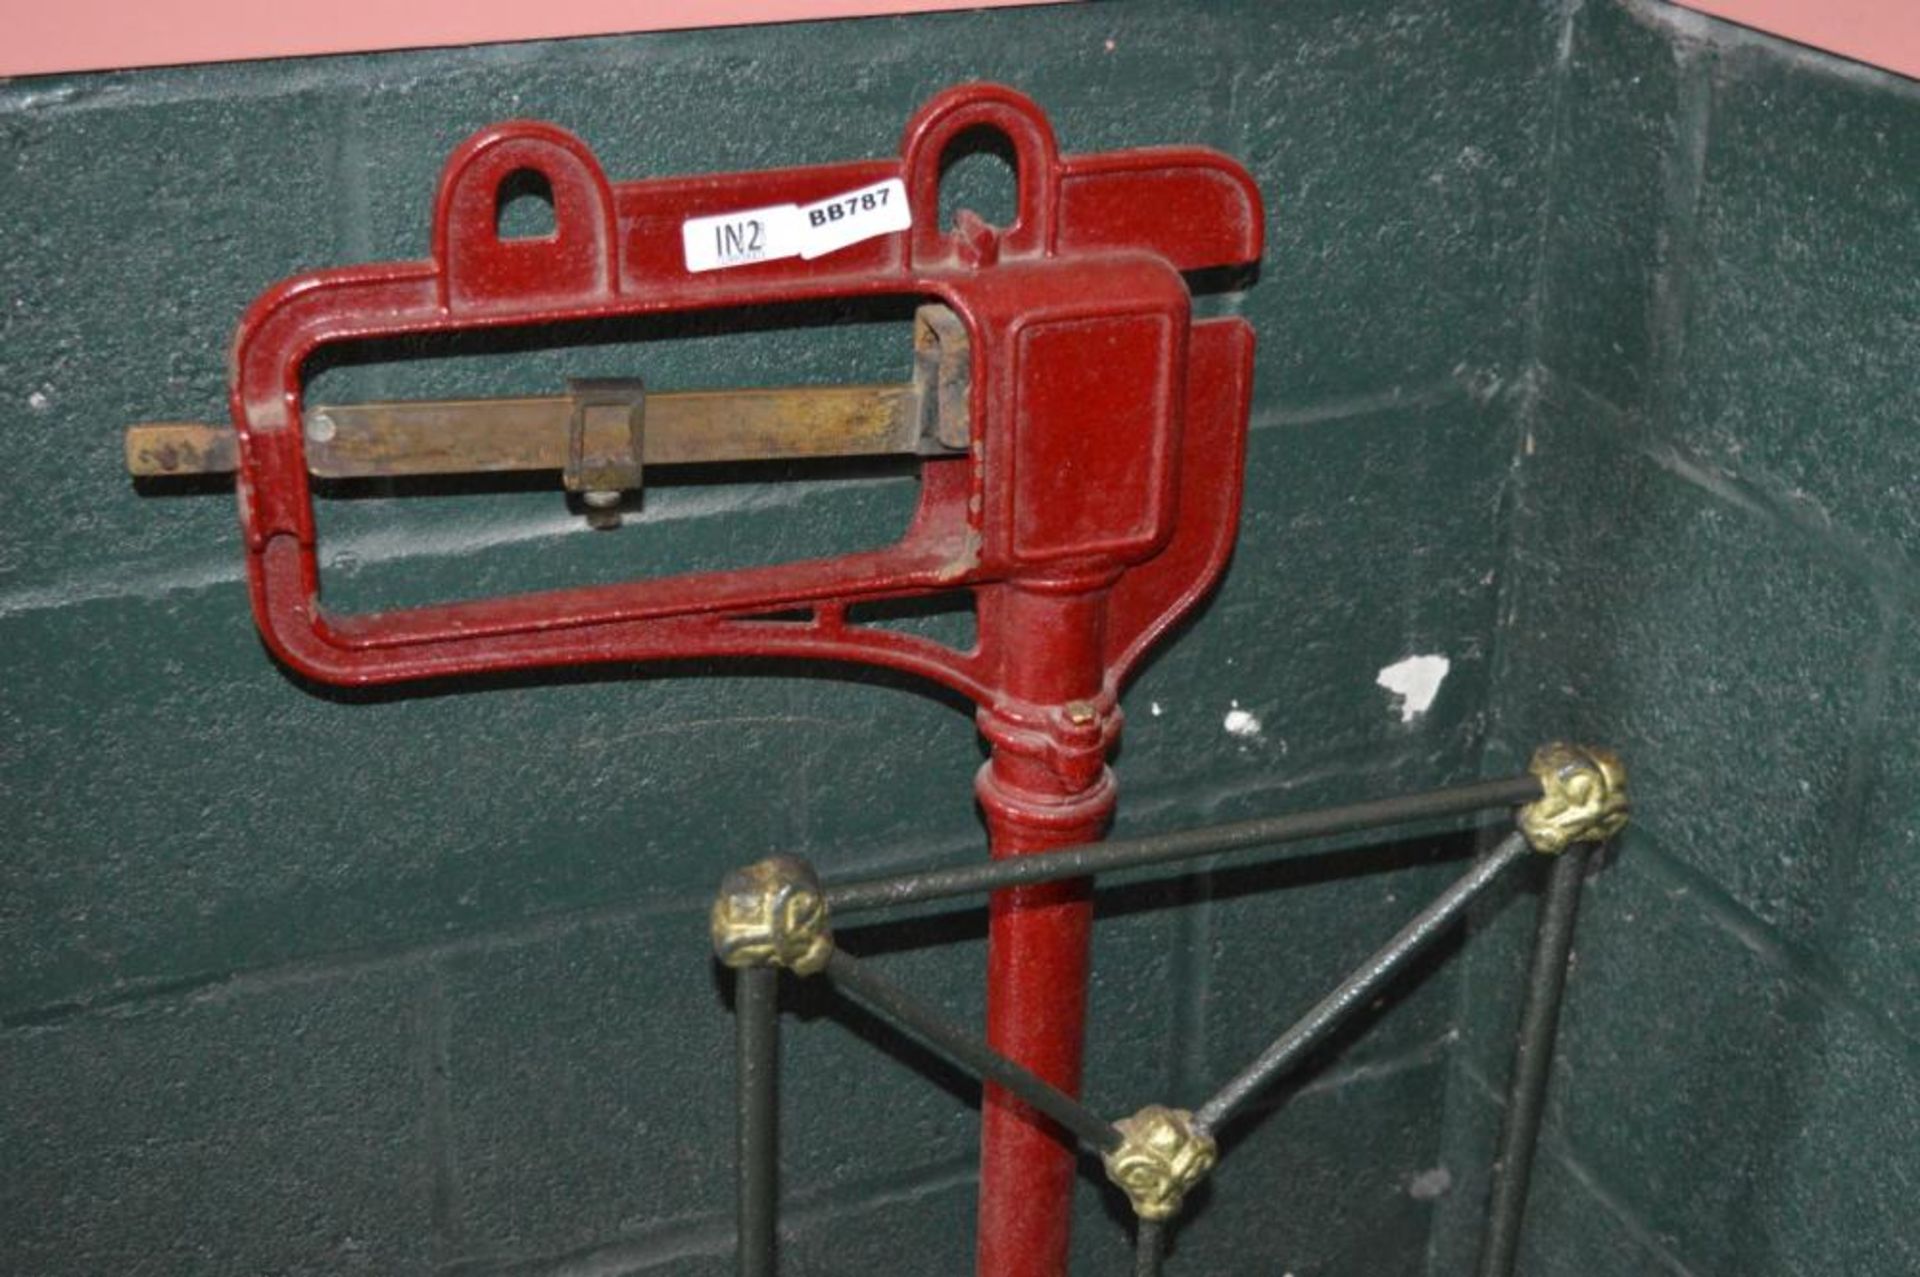 1 x Antique Floor Standing Weighing Scales by Day & Millward of Birmingham - Platform Size 24 x 24 - Image 4 of 4